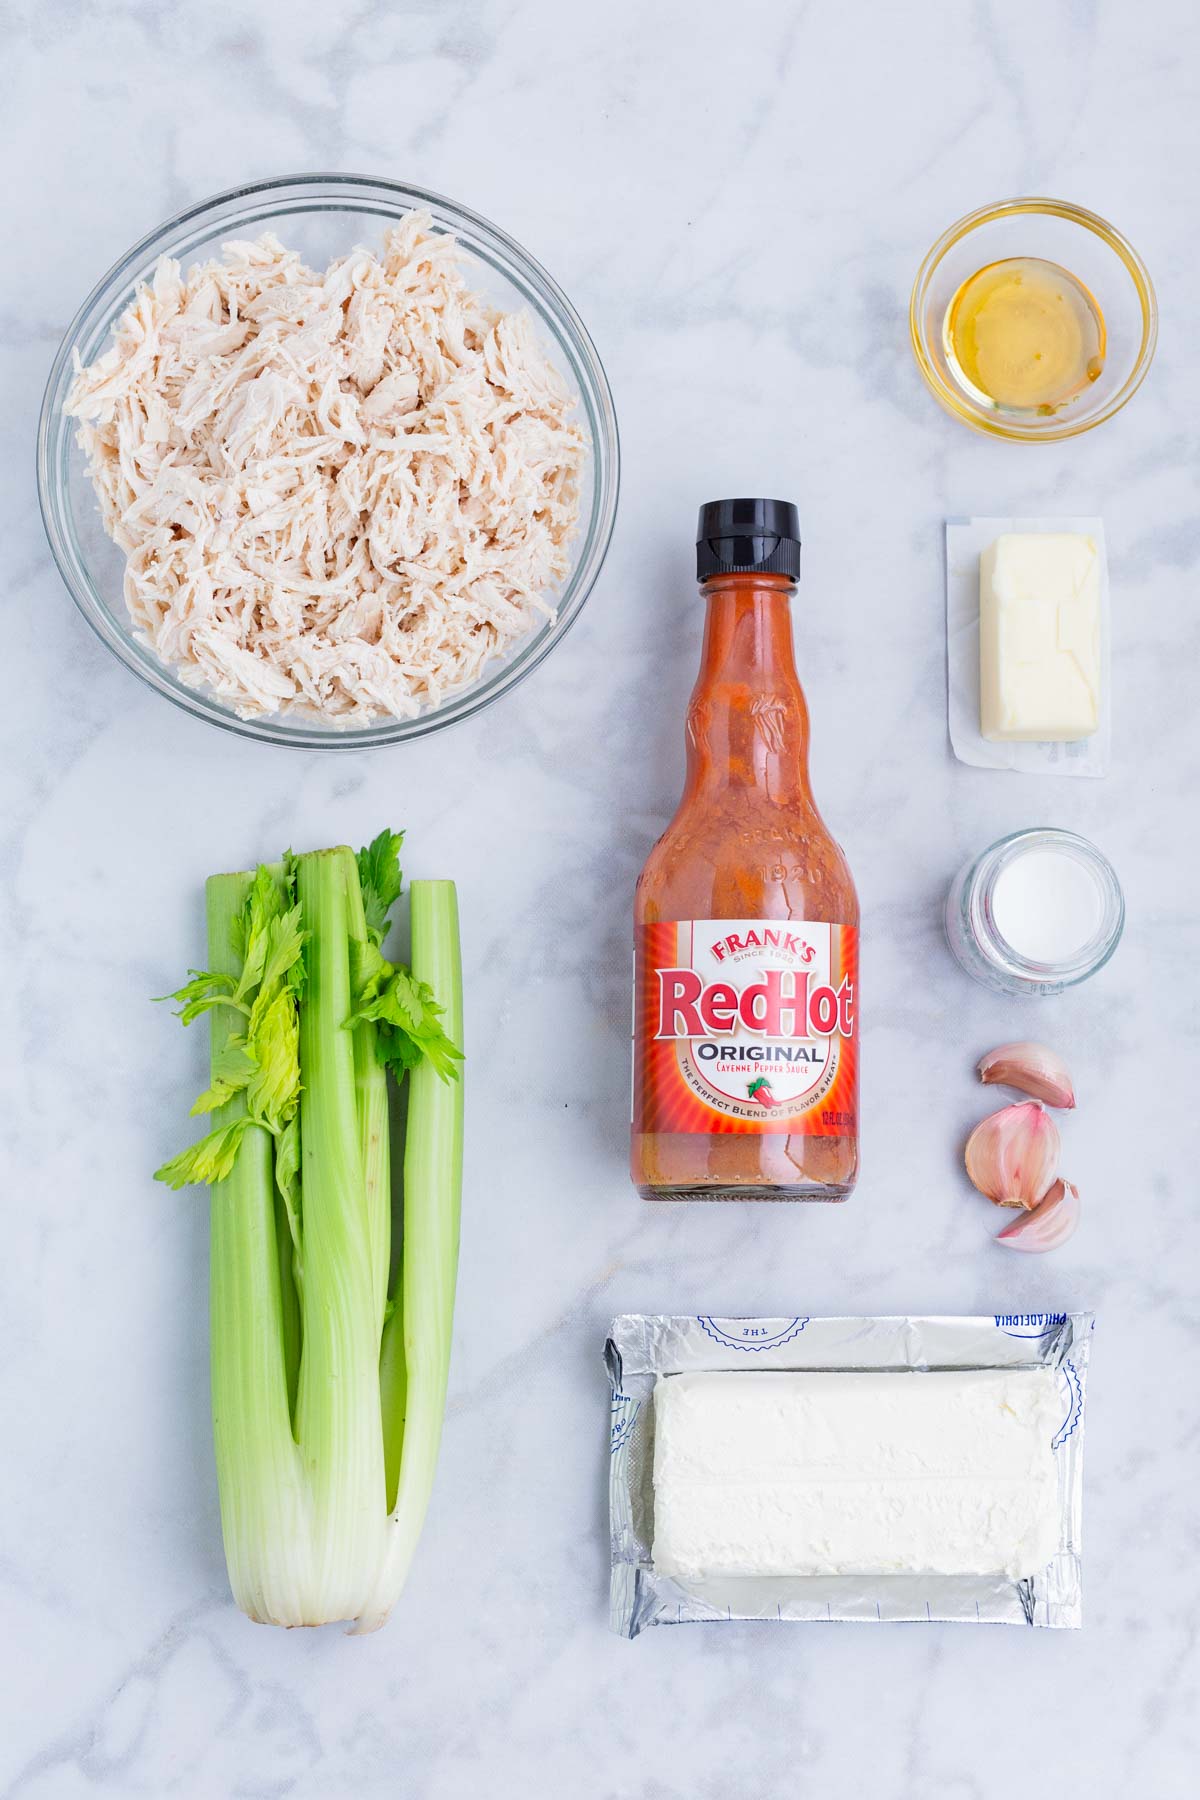 Buffalo sauce, chicken, cream cheese, seasonings, and celery are the main ingredients for this dish.